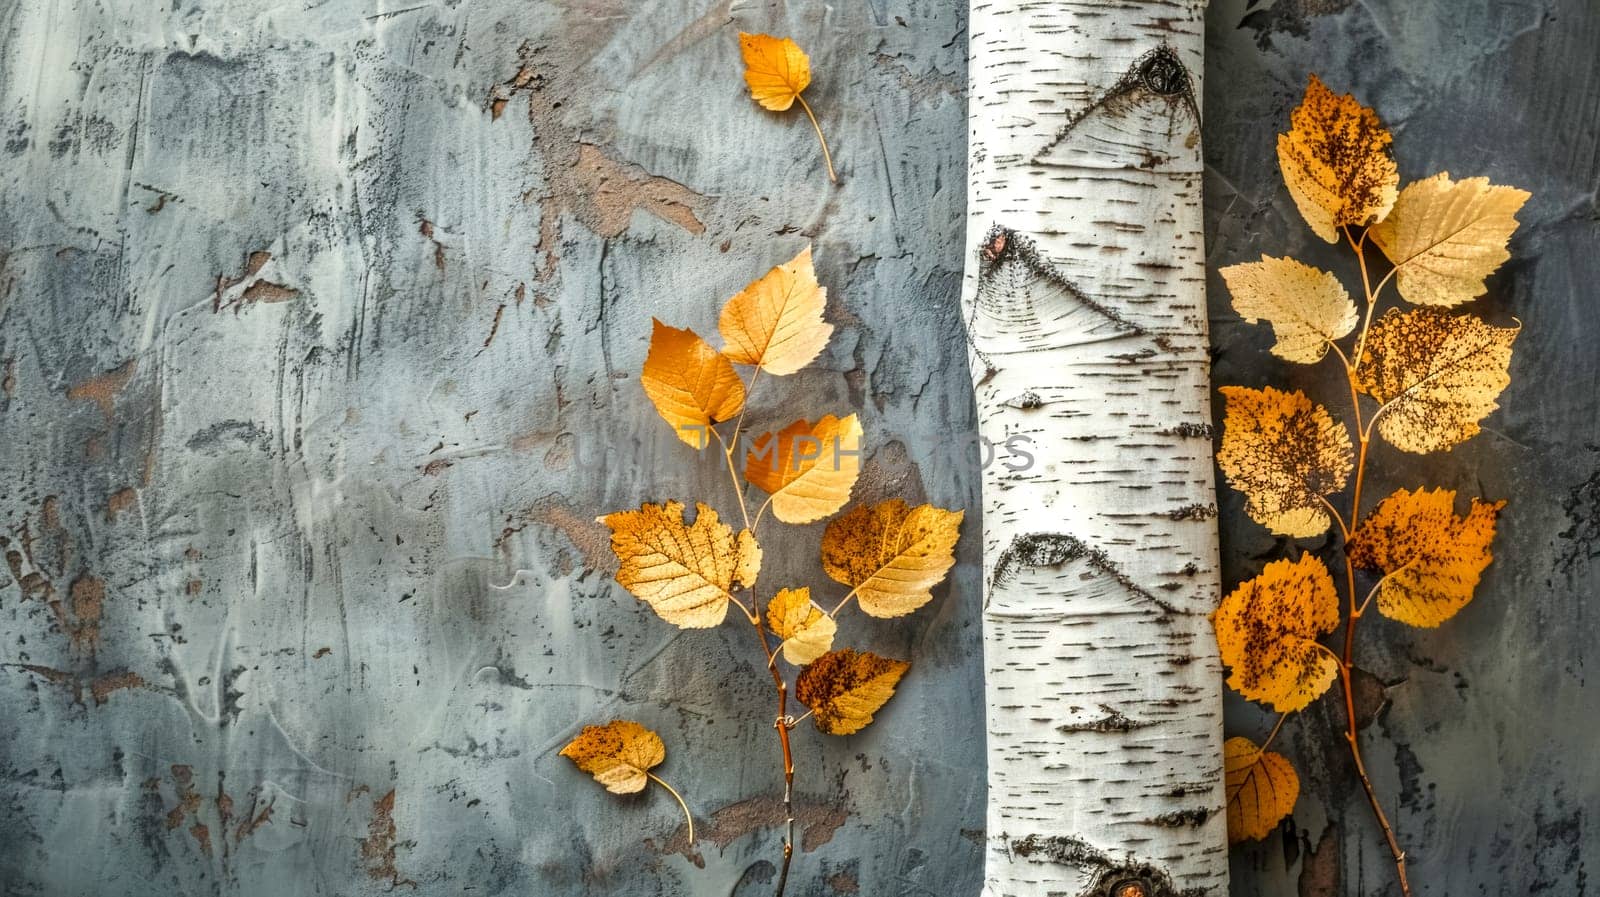 Golden autumn leaves on birch branches set against a rustic grey backdrop